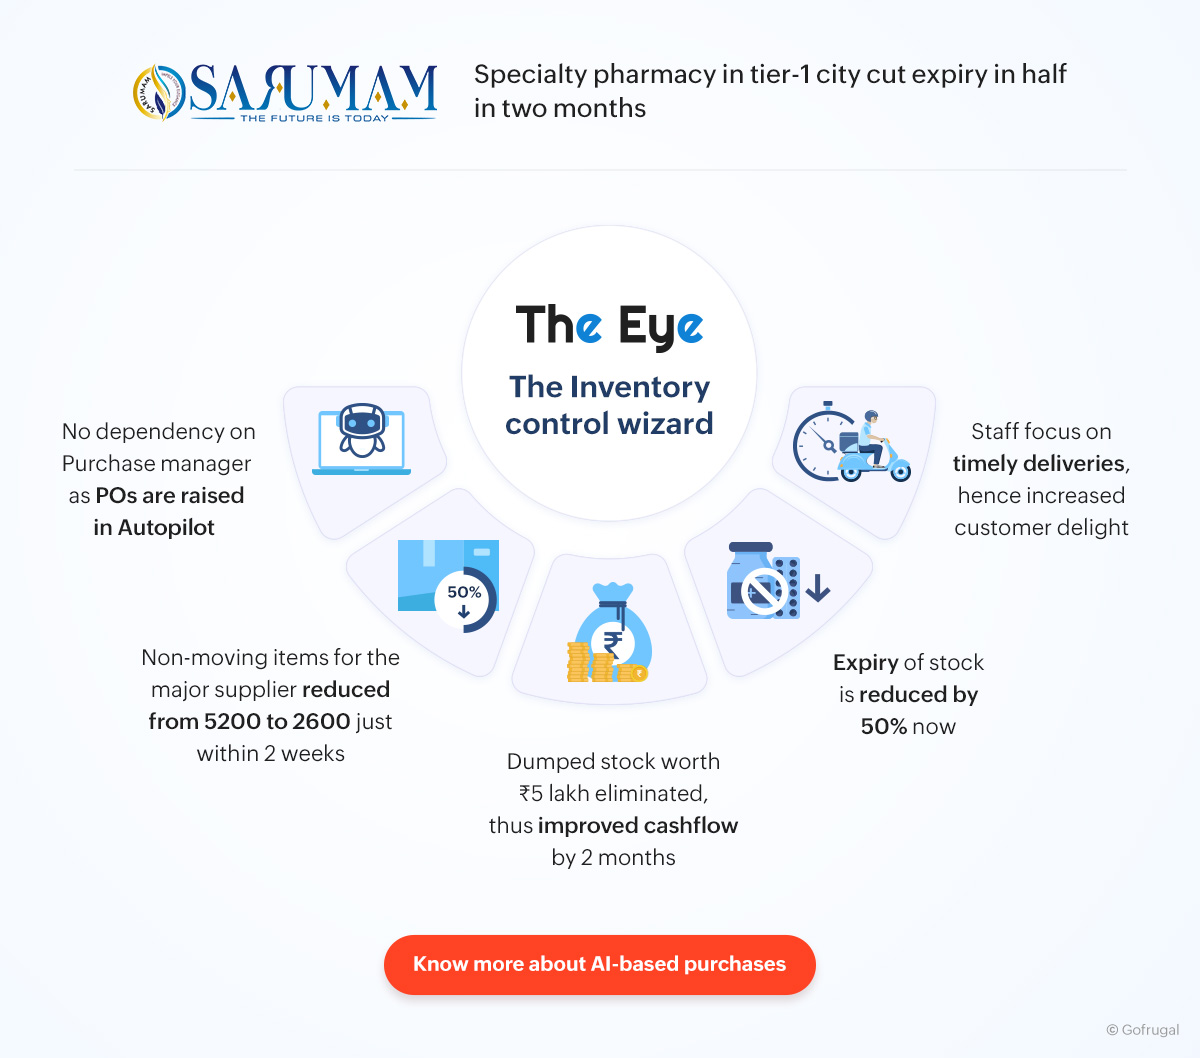 Case study of Sarumam Pharmacy - Specialty Pharmacy that put purchases in autopilot, cut expiry and non-moving items to half, improved the cash flow, rand educed stock-out using The Eye, thereby doing ensuring home deliveries 